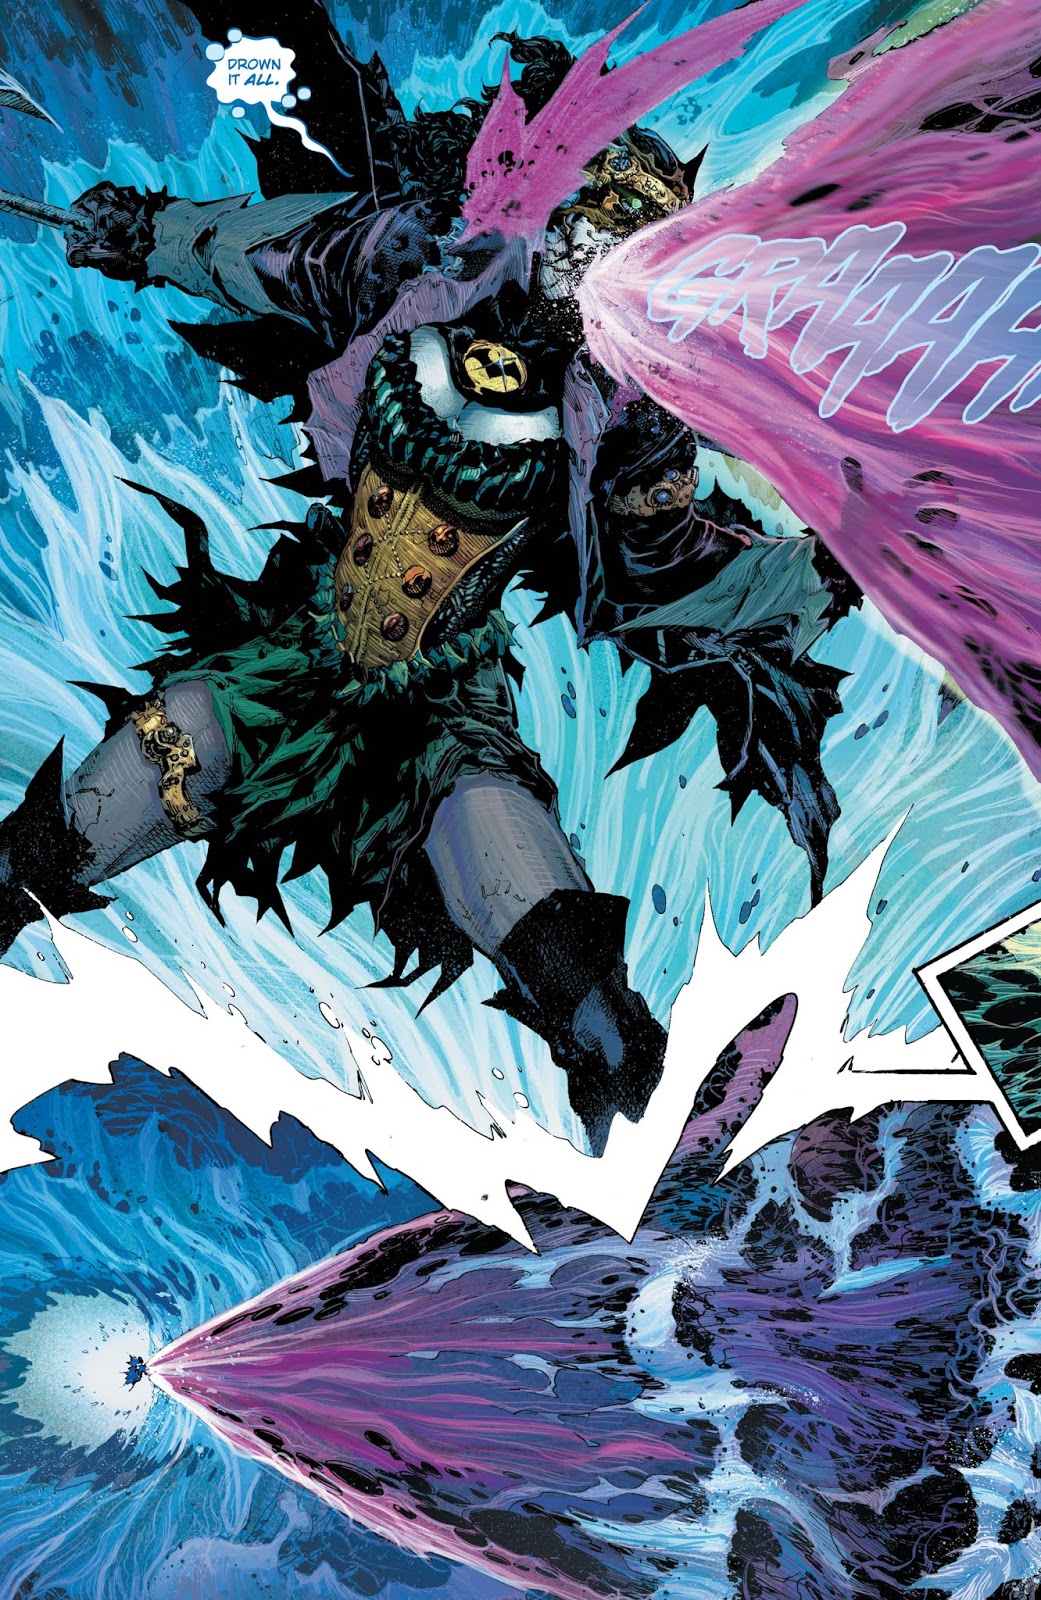 Weird Science DC Comics: Batman: The Drowned #1 Review and **SPOILERS**